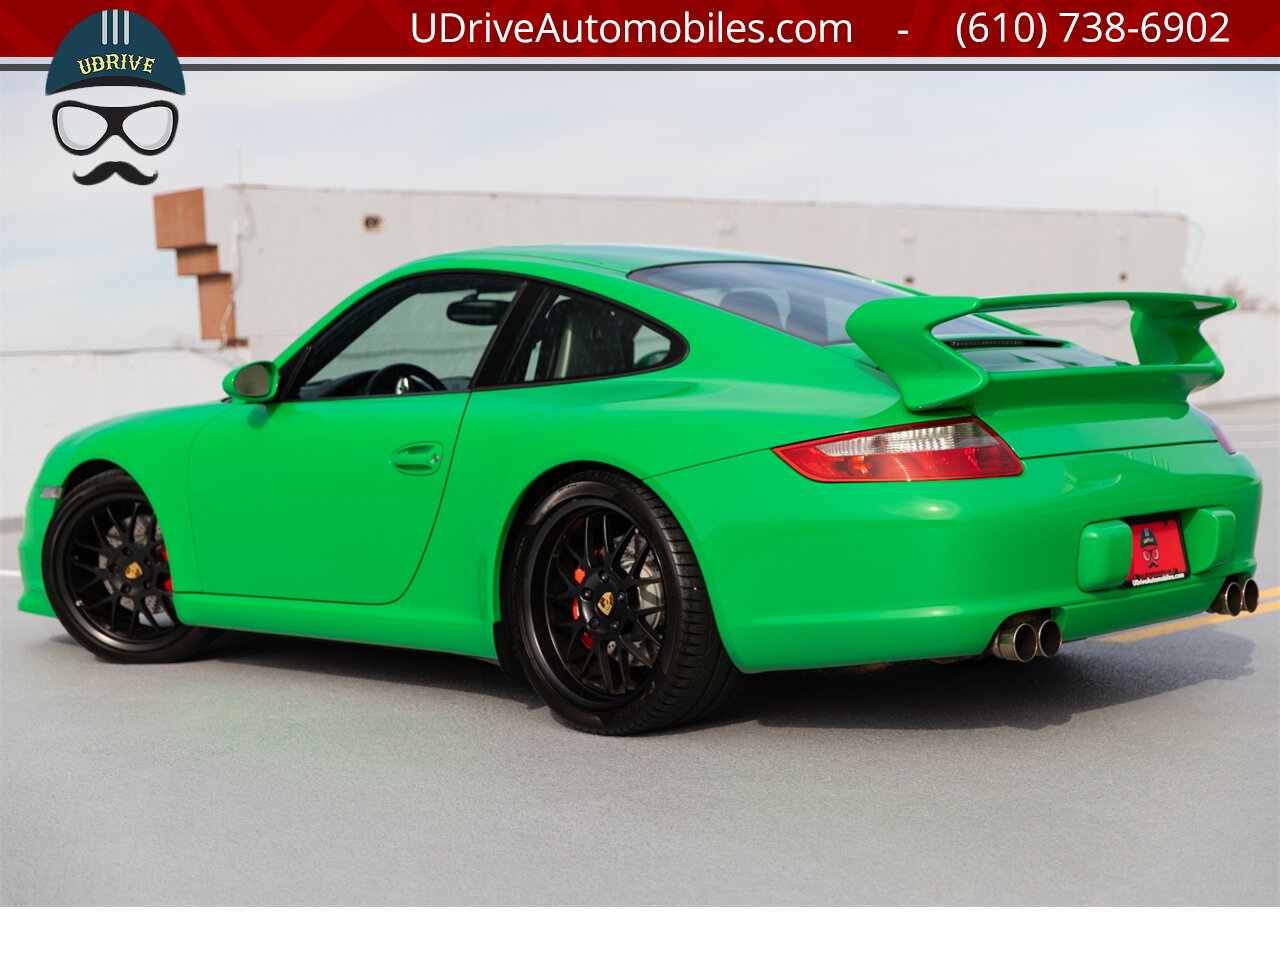 2008 Porsche 911 S 997 6Sp PTS RS Green AeroKit 1of a Kind  $118k MSRP Champion F77 Pkg RG5 Whls - Photo 5 - West Chester, PA 19382